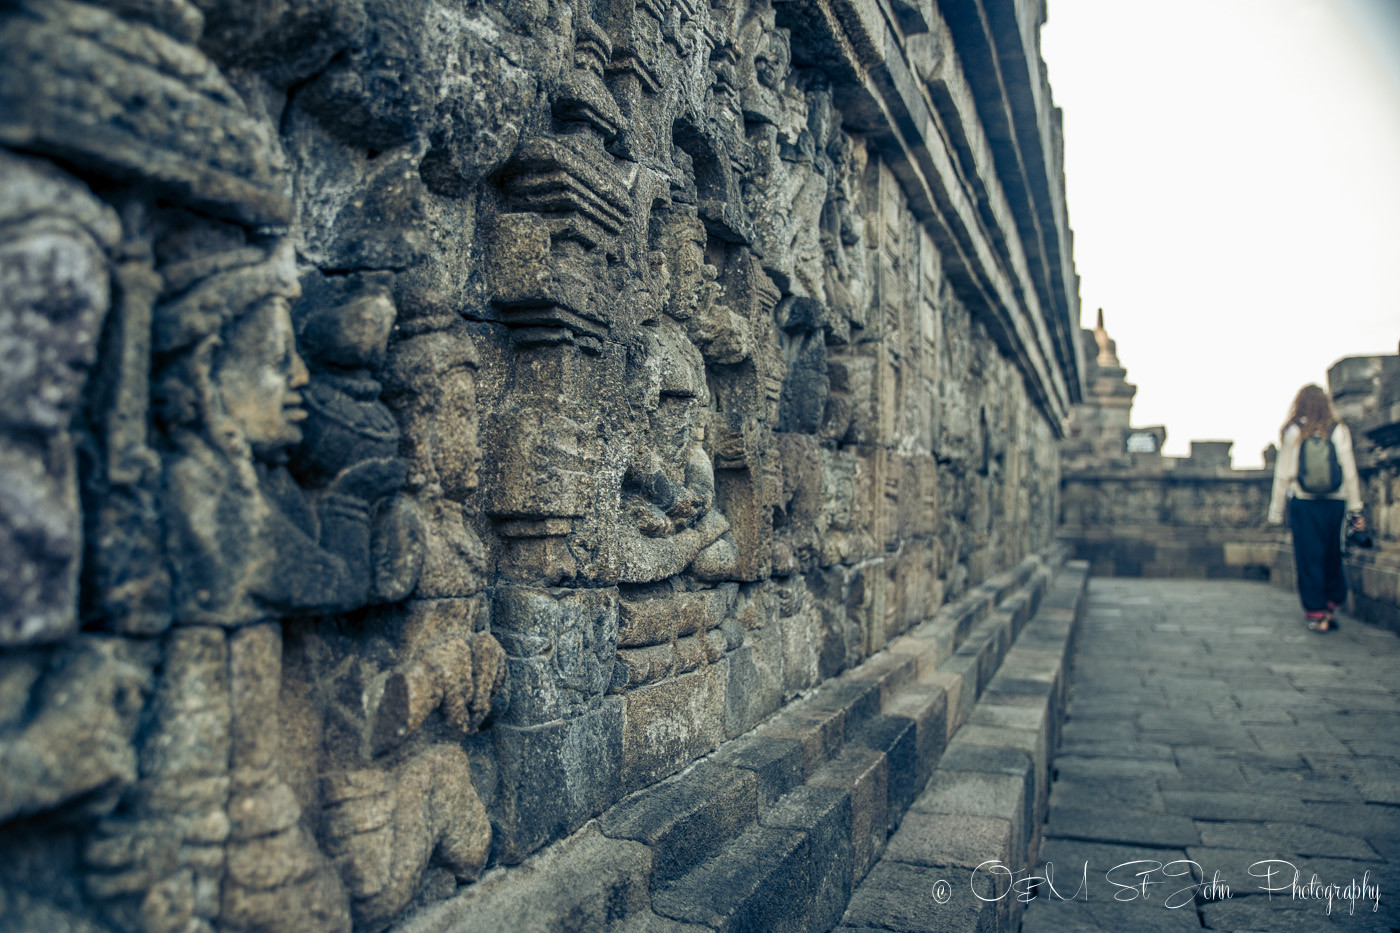 Intricate wall carvings at Borobudur. Indonesia